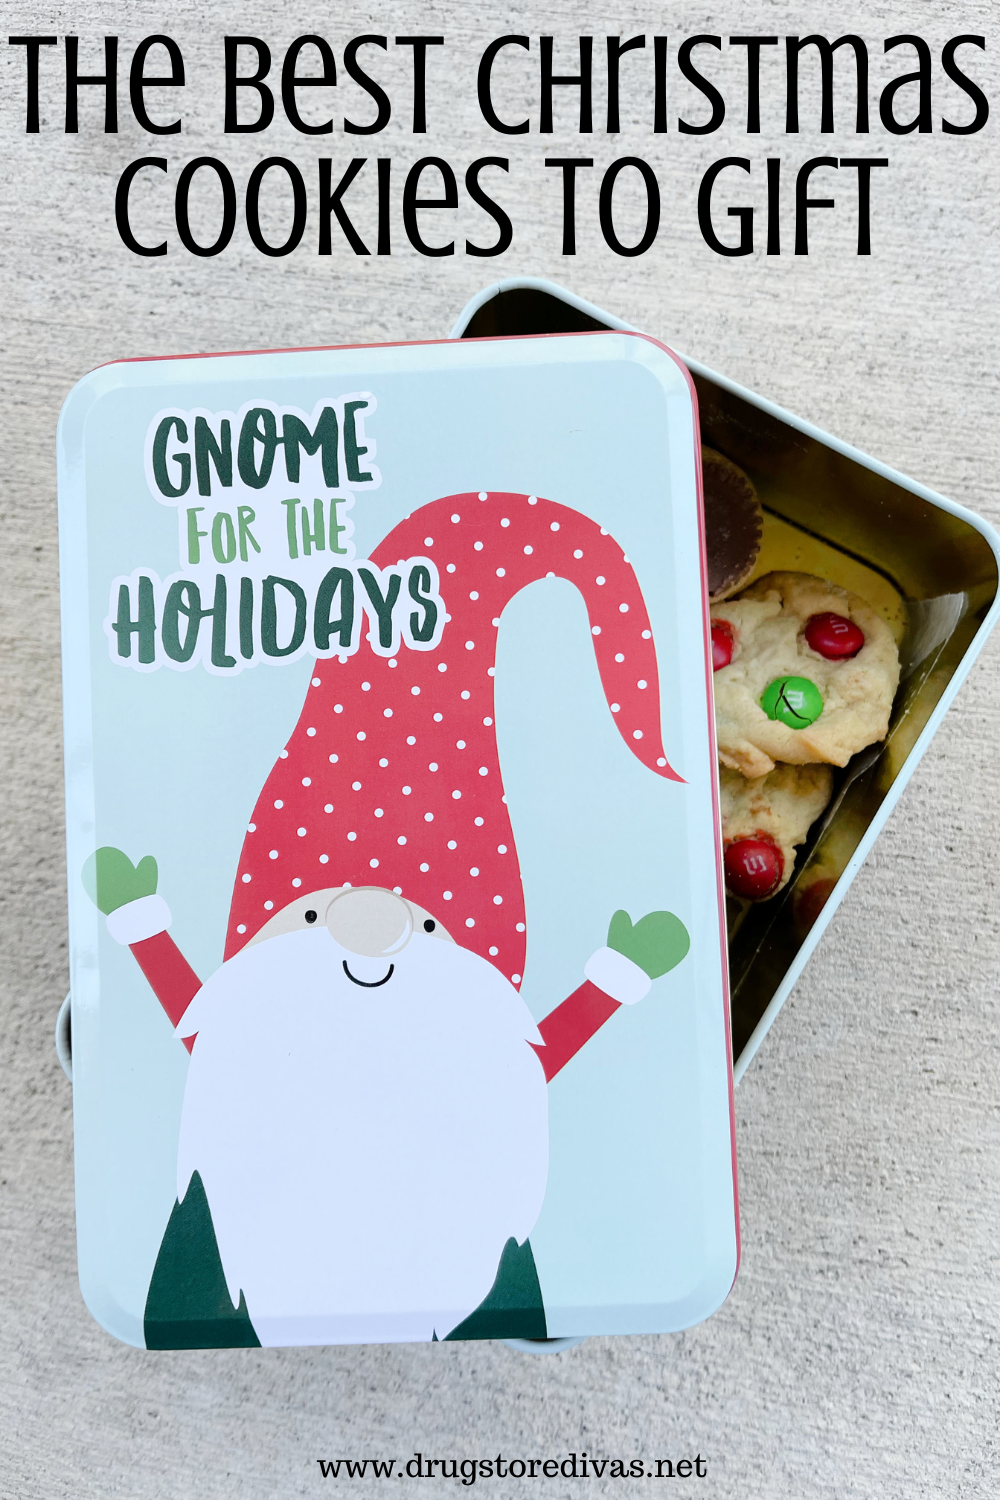 A metal box with a gnome on the front and cookies inside with the words 